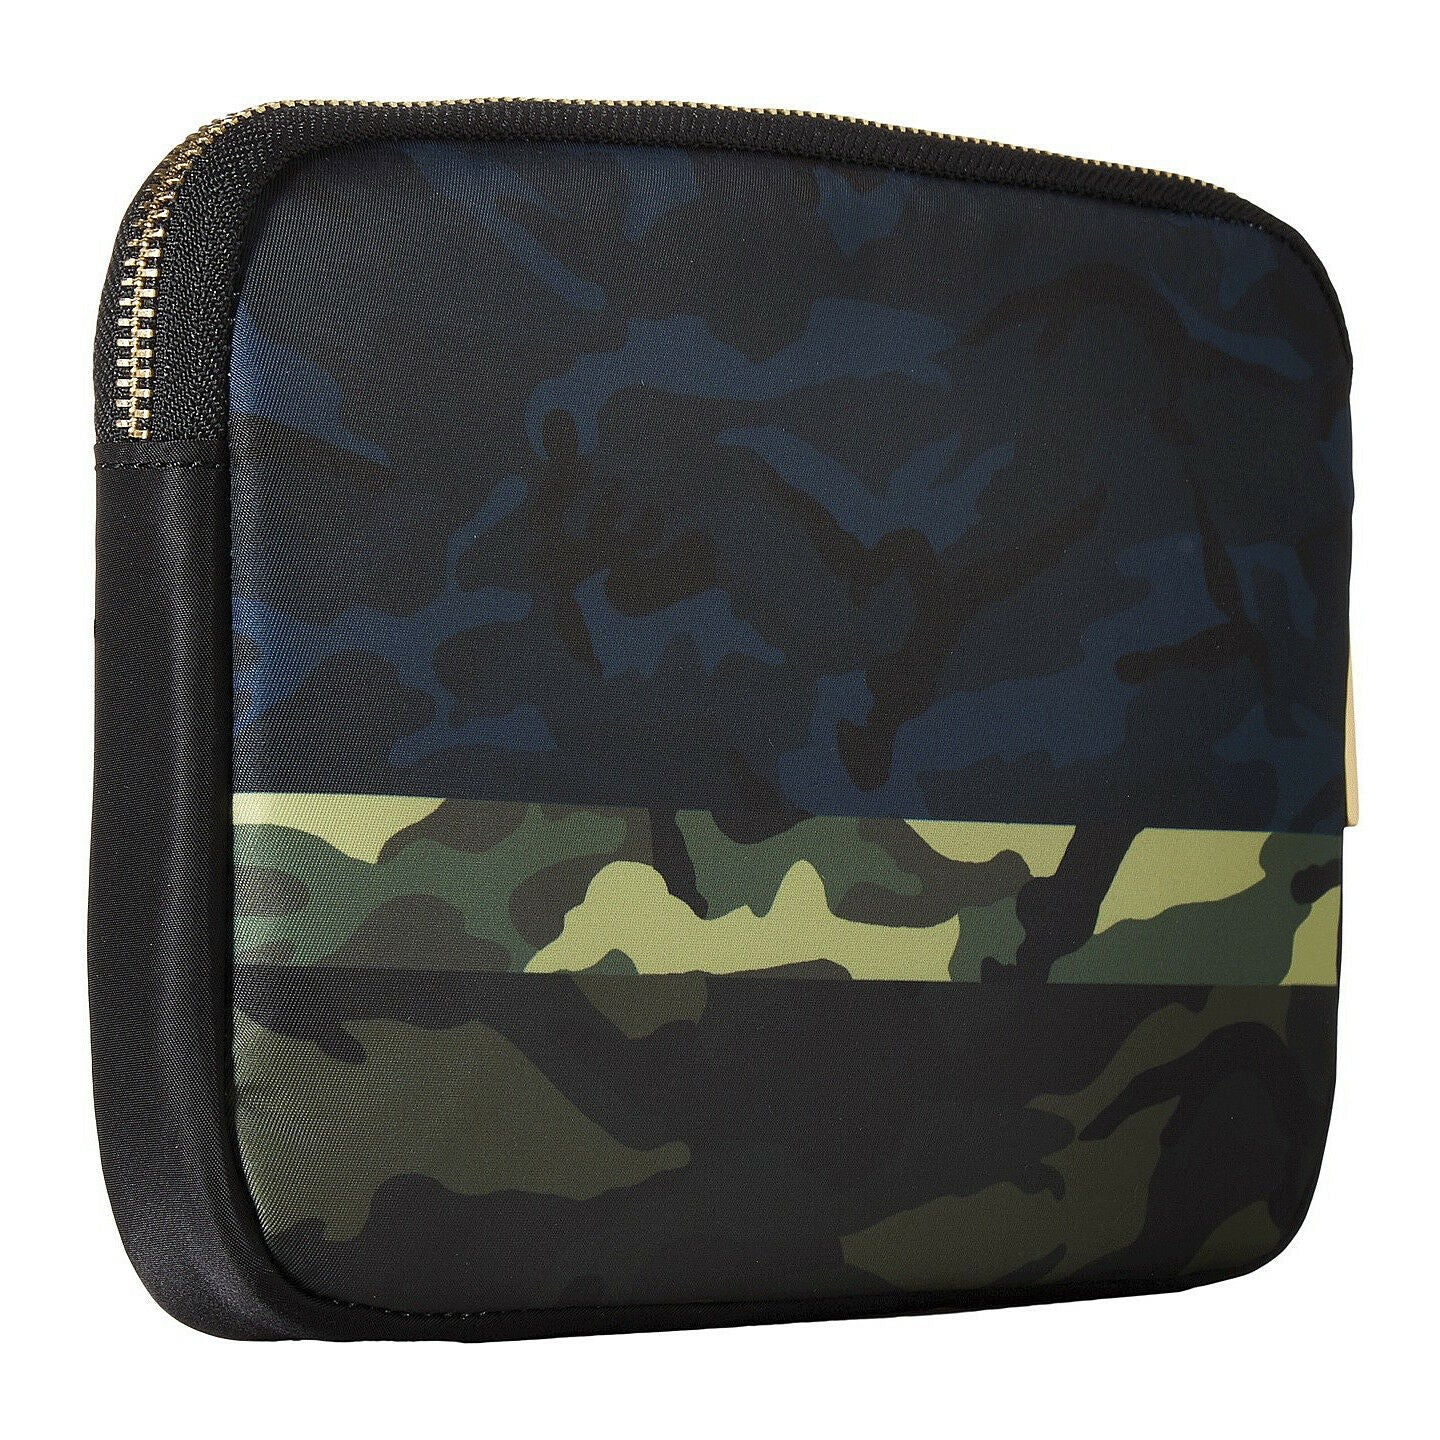 Marc Jacobs Collection Julie Verhoeven Camo Mini Tablet iPad Sleeve Case NWT